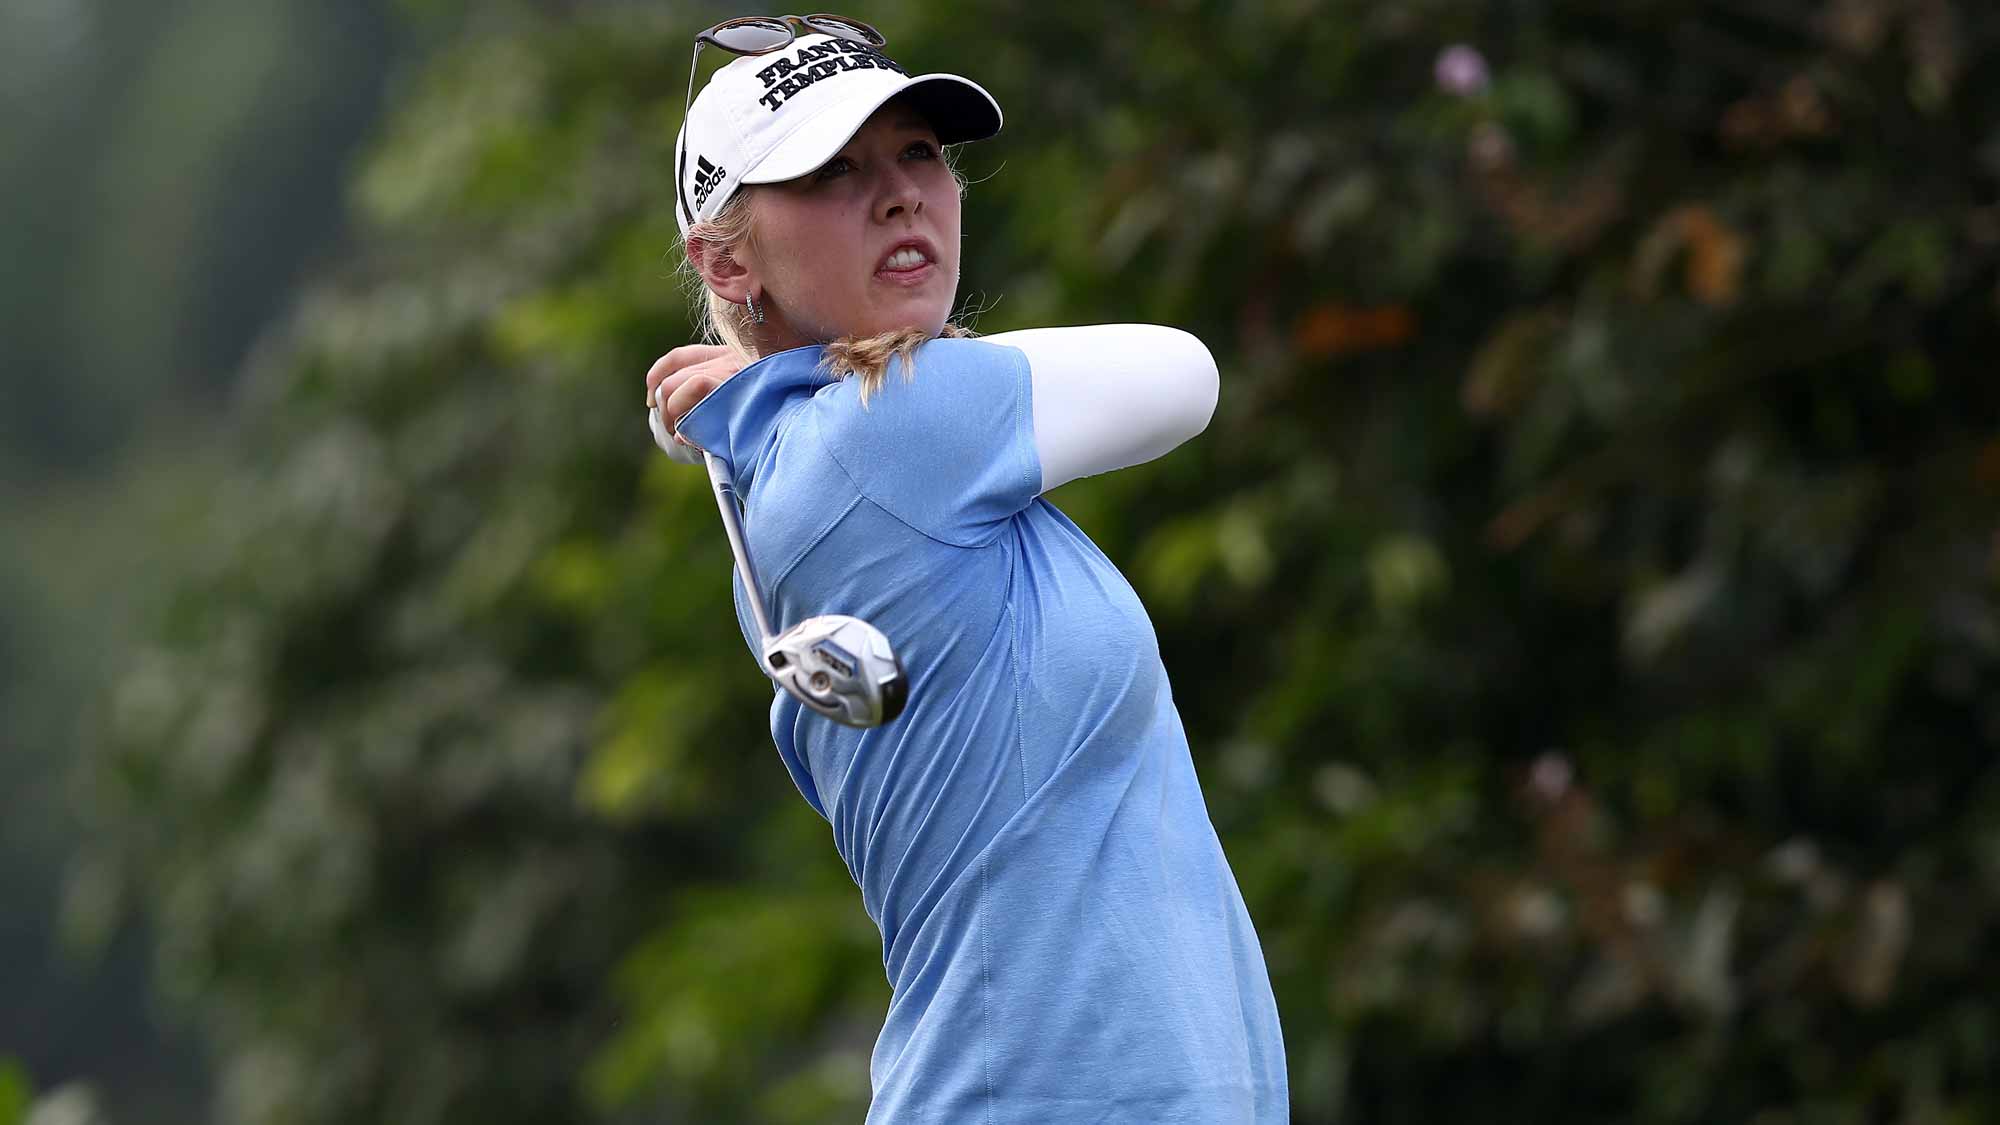 Jessica Korda of USA watches her tee shot on the 4th hole during the final round of the Sime Darby LPGA Tour at Kuala Lumpur Golf & Country Club